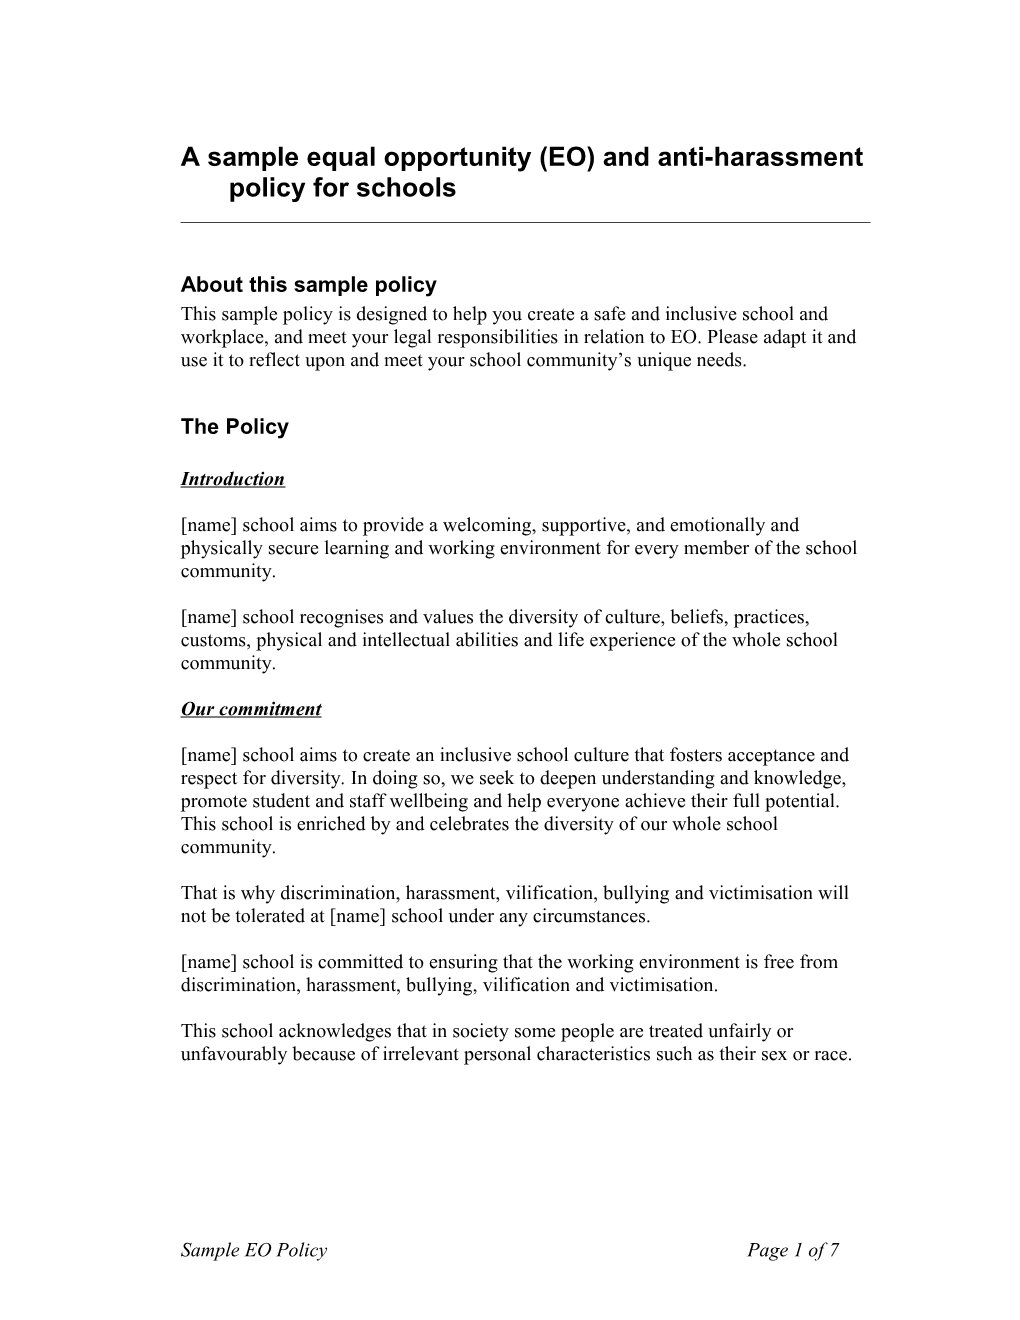 A Sample Equal Opportunity (EO) and Anti-Harassment Policy for Schools